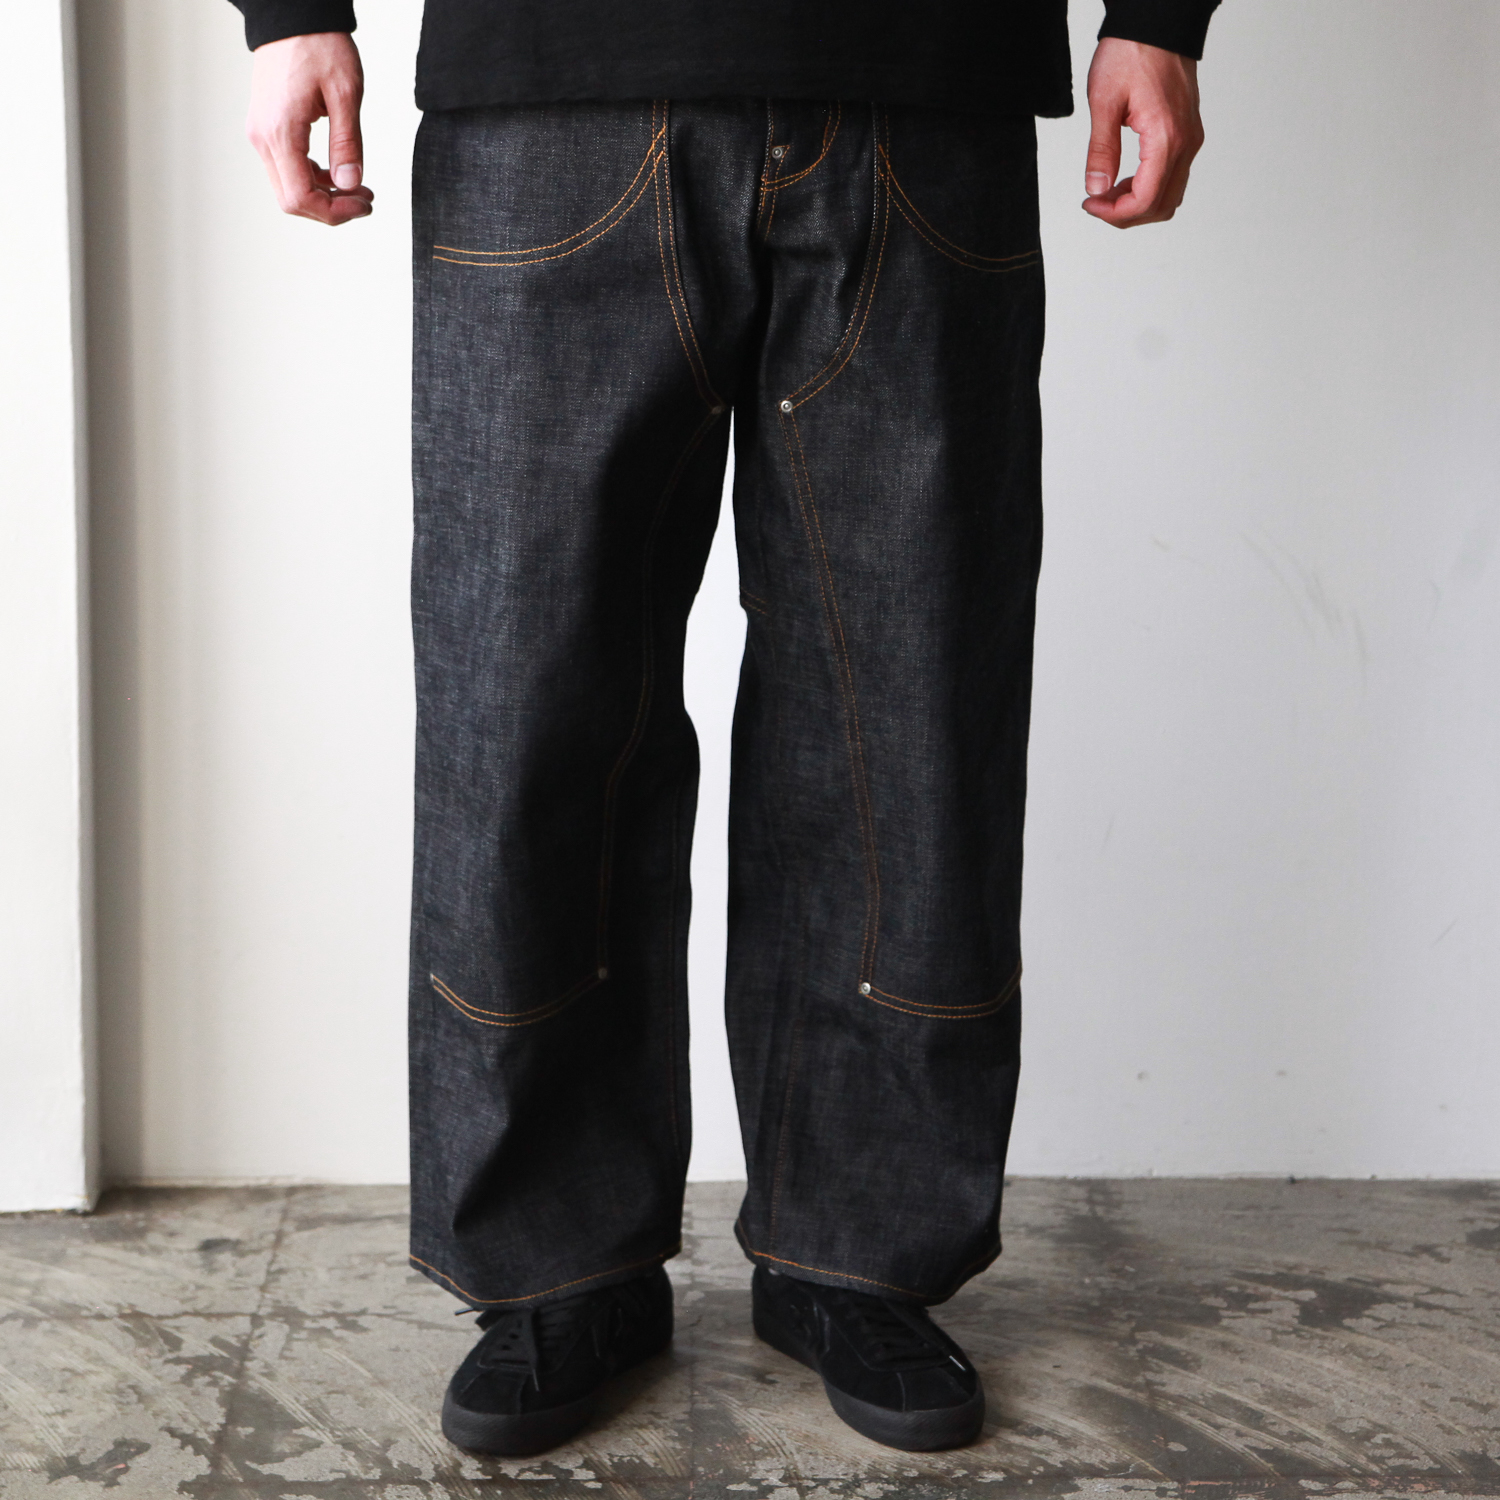 suger hill 18AW denim pants | www.trevires.be